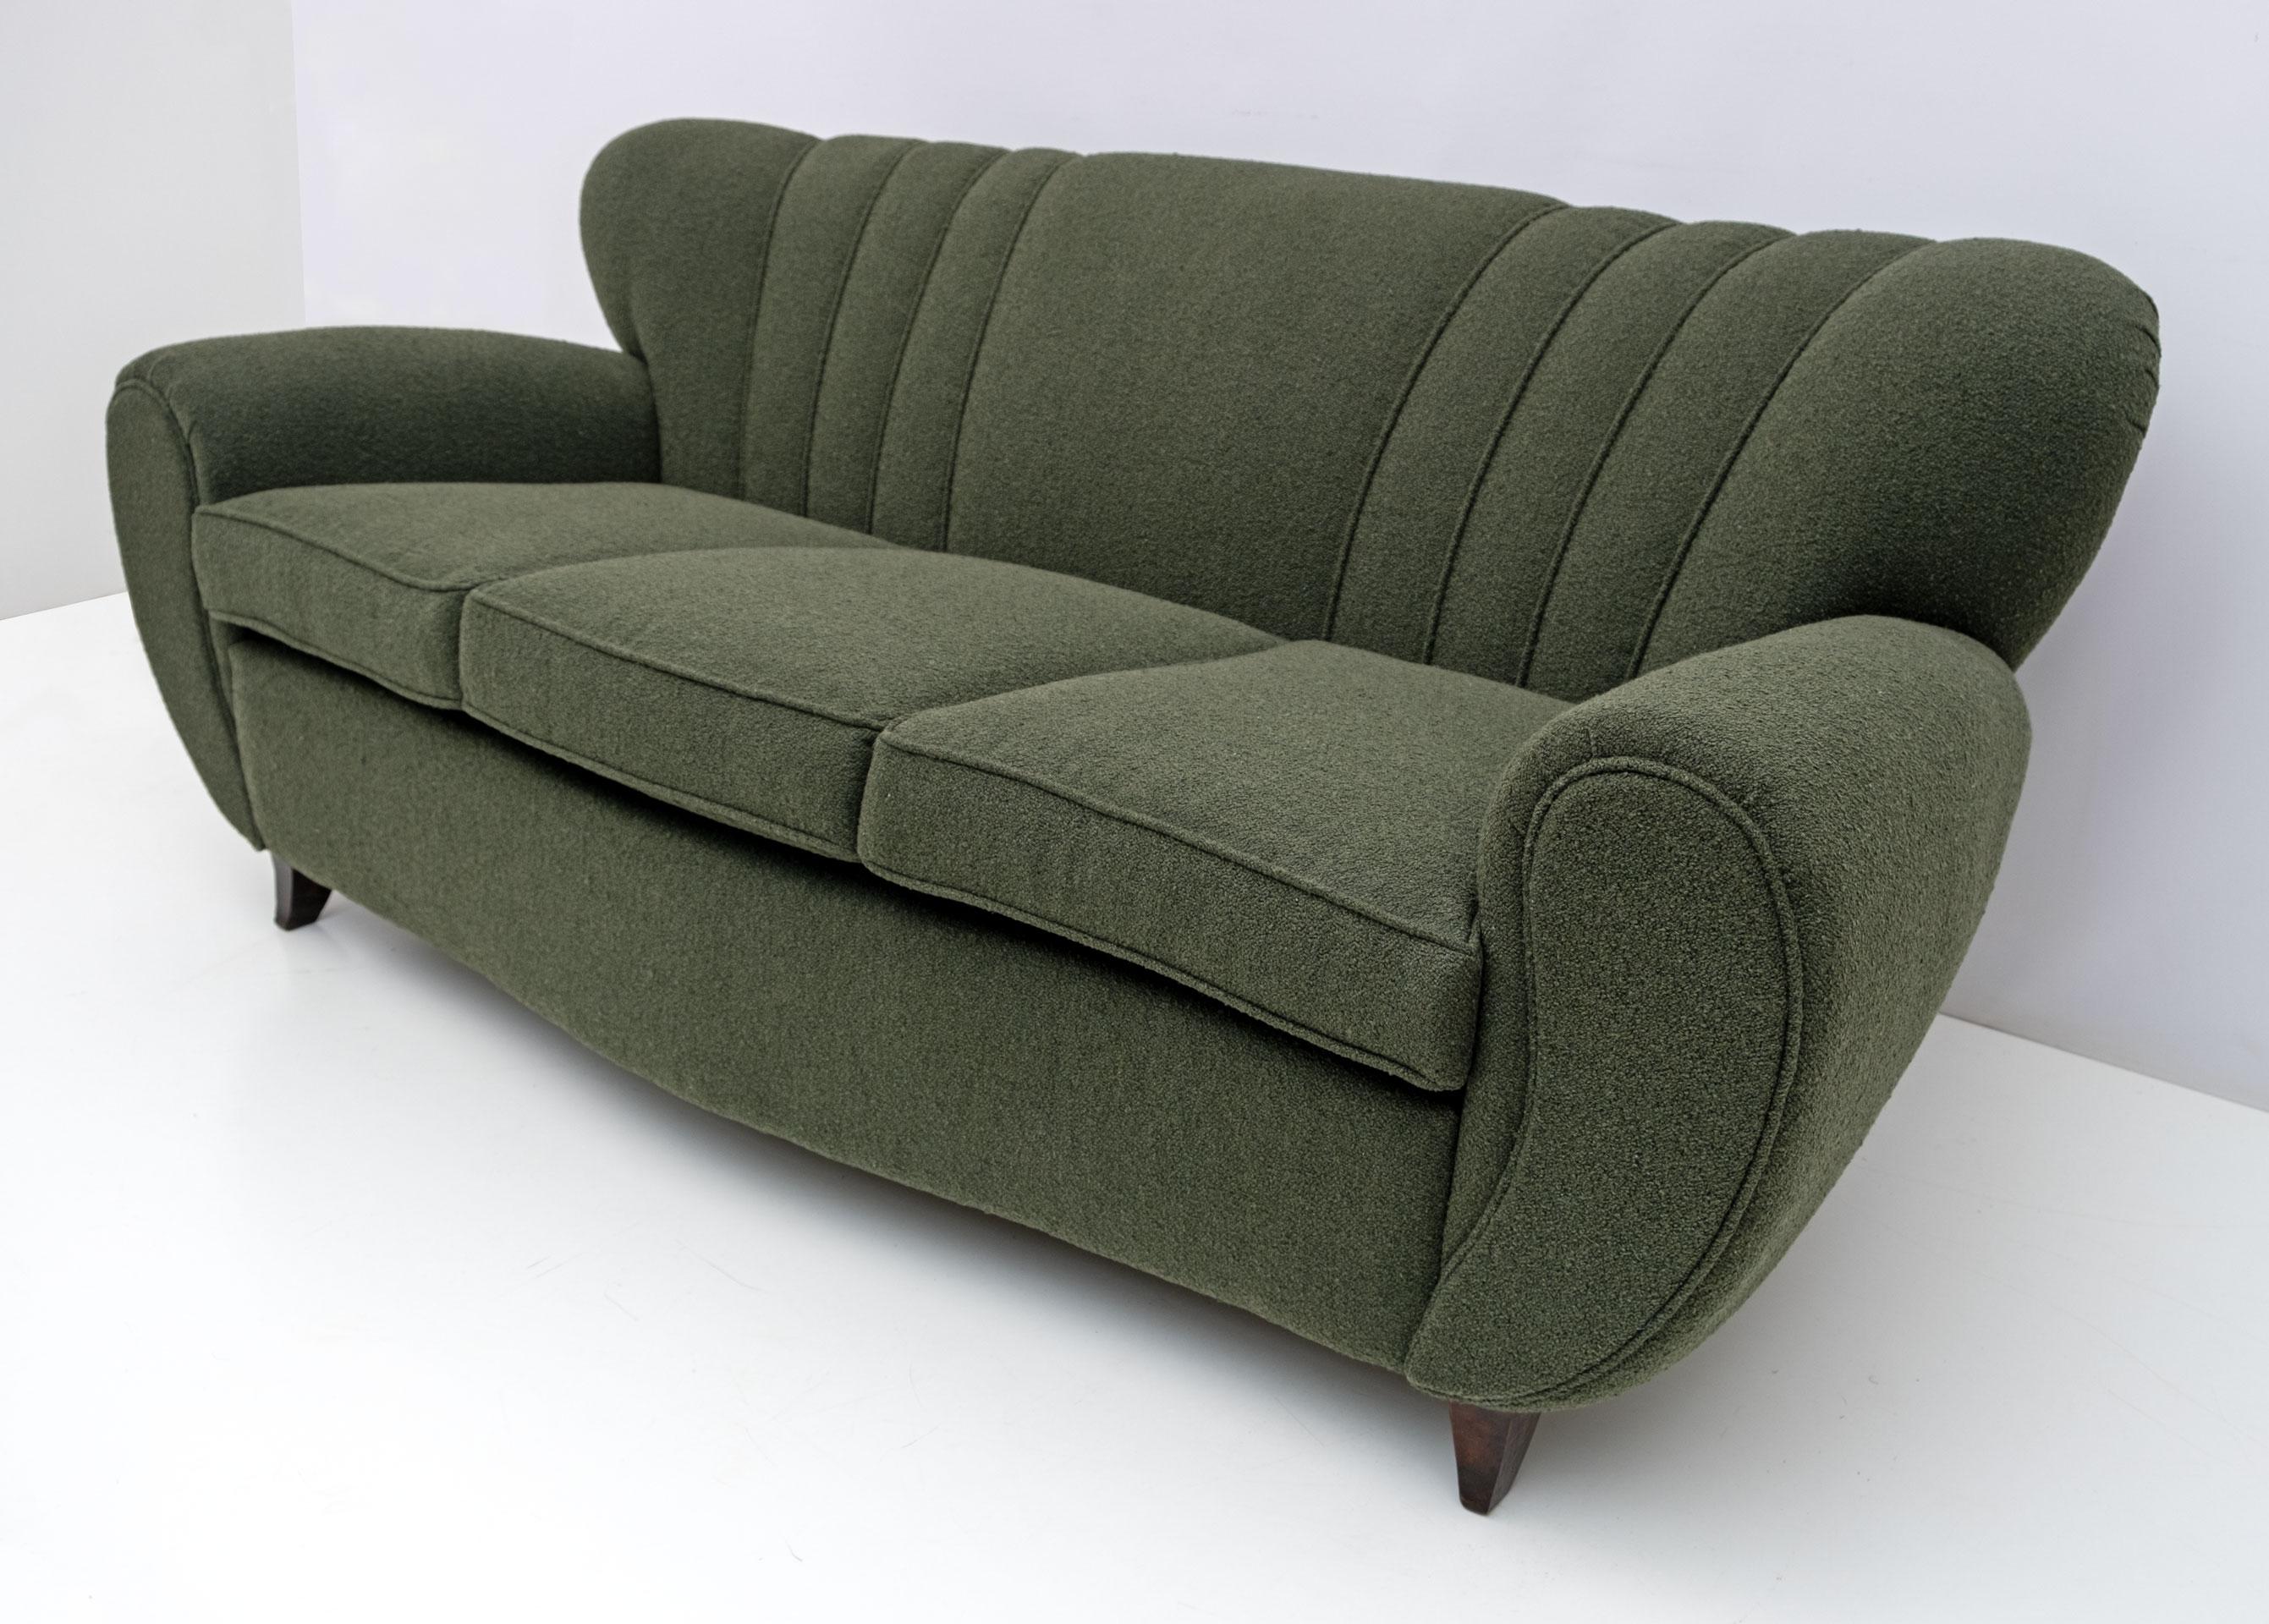 A large Italian sculptural sofa attributed to Guglielmo Ulrich, very comfortable. Recently upholstered in green Bouclè, finished with a border of the fabric itself, in order to accentuate its curved shapes. The tapered and curved feet in